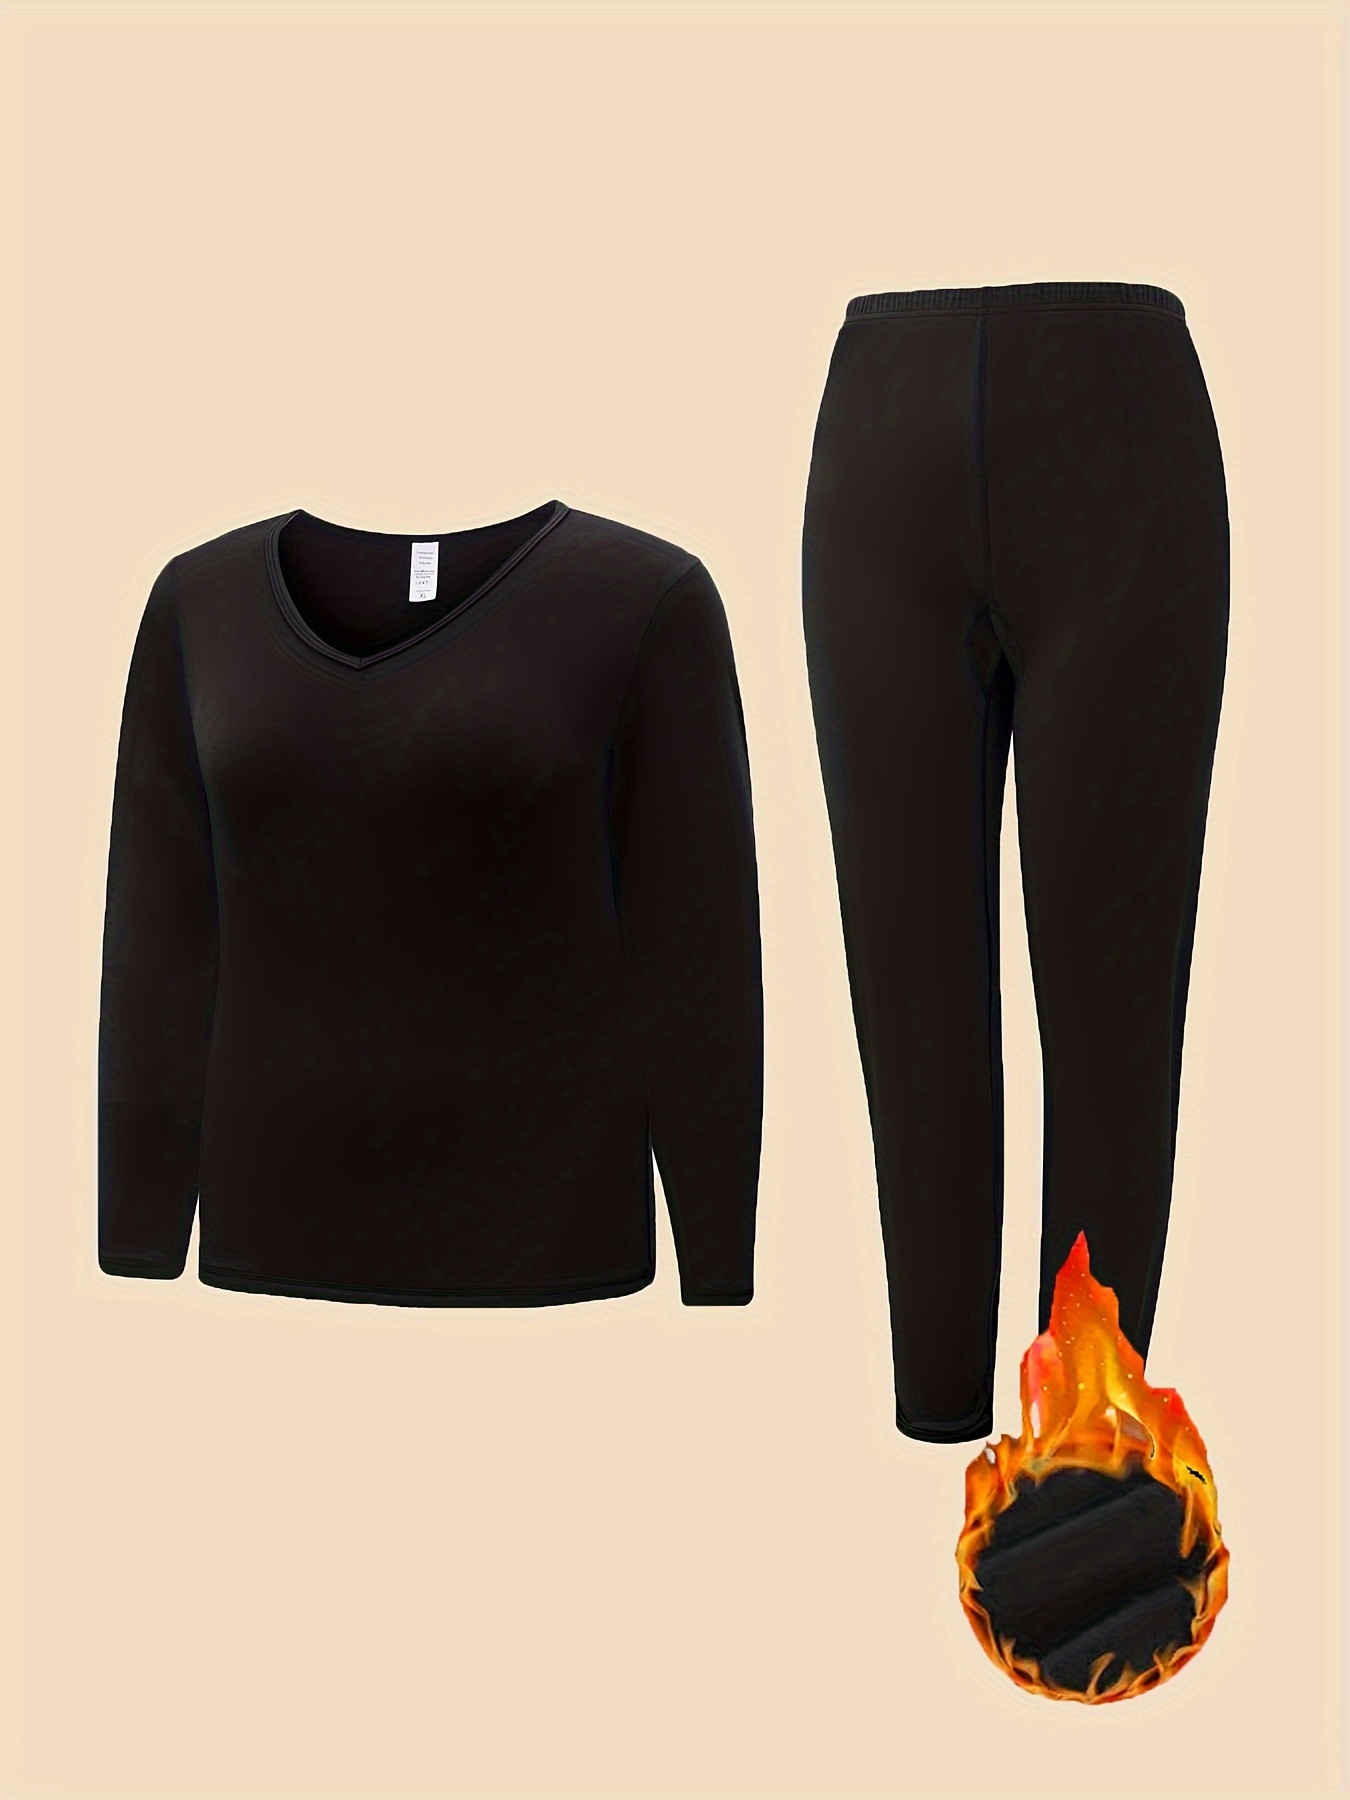 Thermal Underwear For Women 2 Piece Plus Size Lounge Sets Winter Warm  Fleece Lined Long Sleeve Shirts And Long Pants